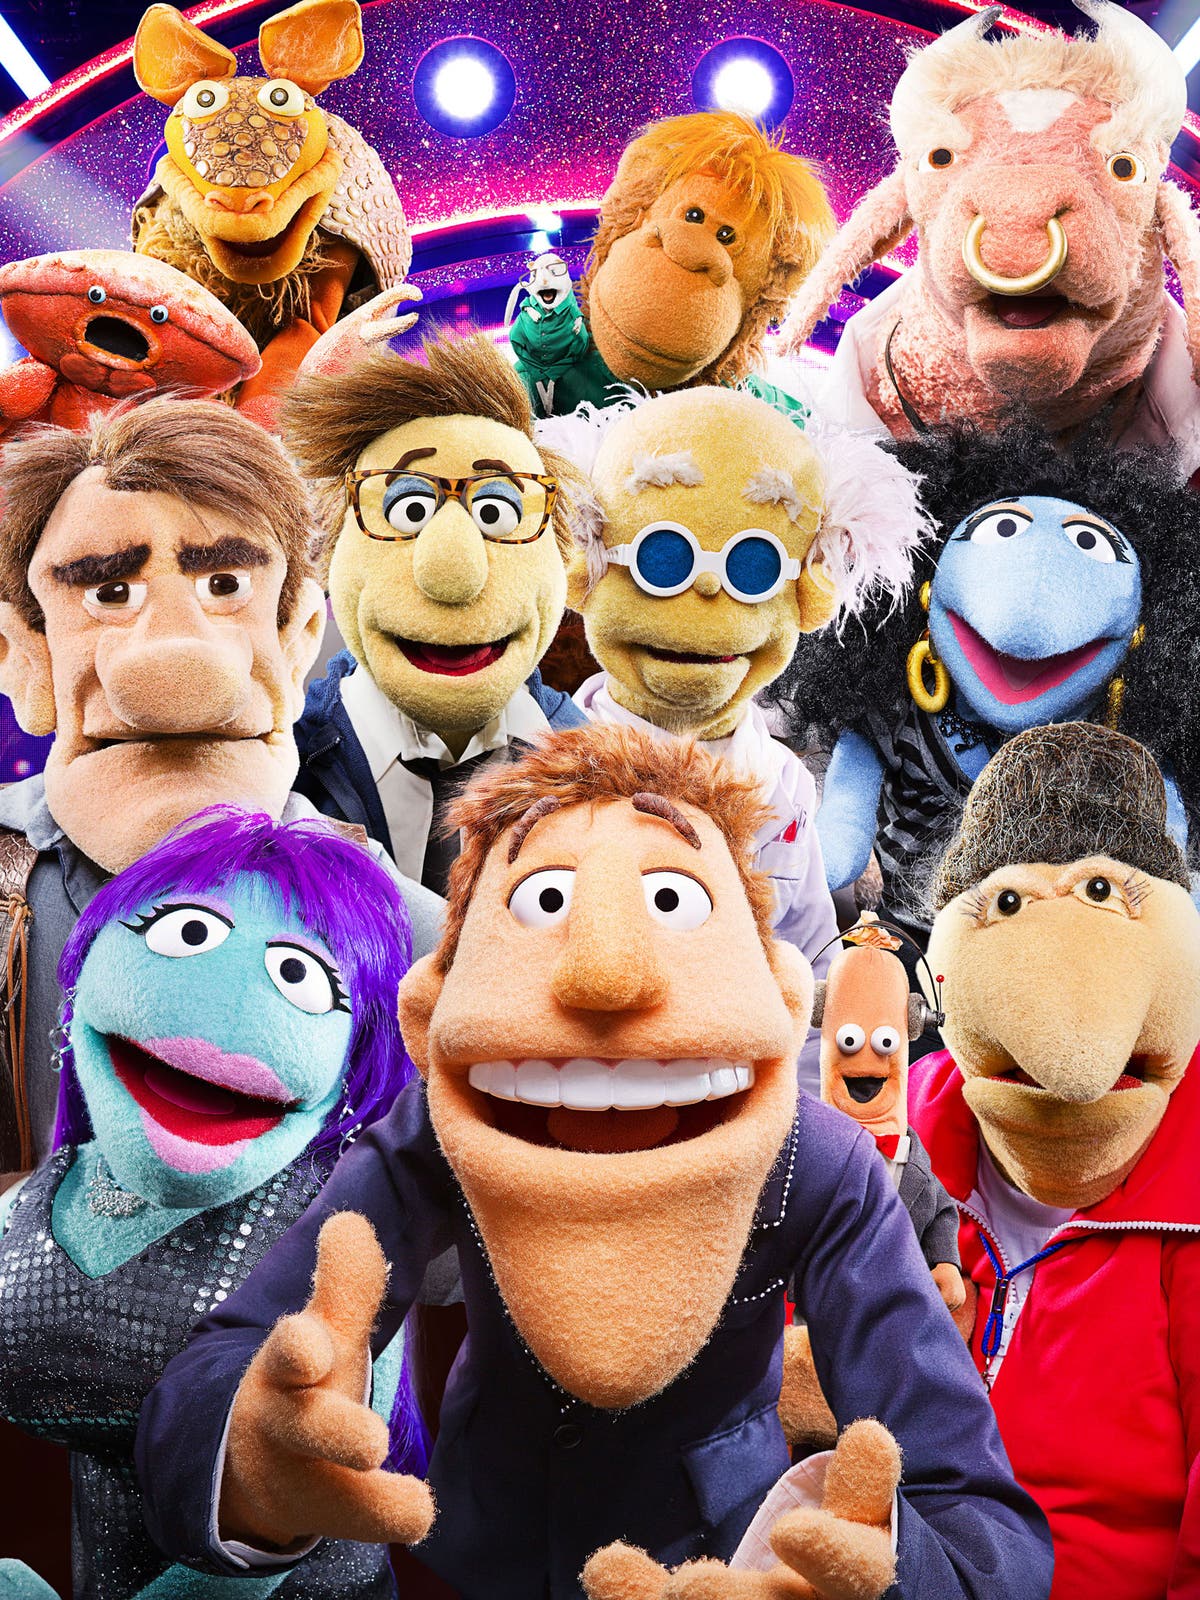 tv-review-that-puppet-game-show-need-a-ratings-boost-call-in-the-muppets-the-independent